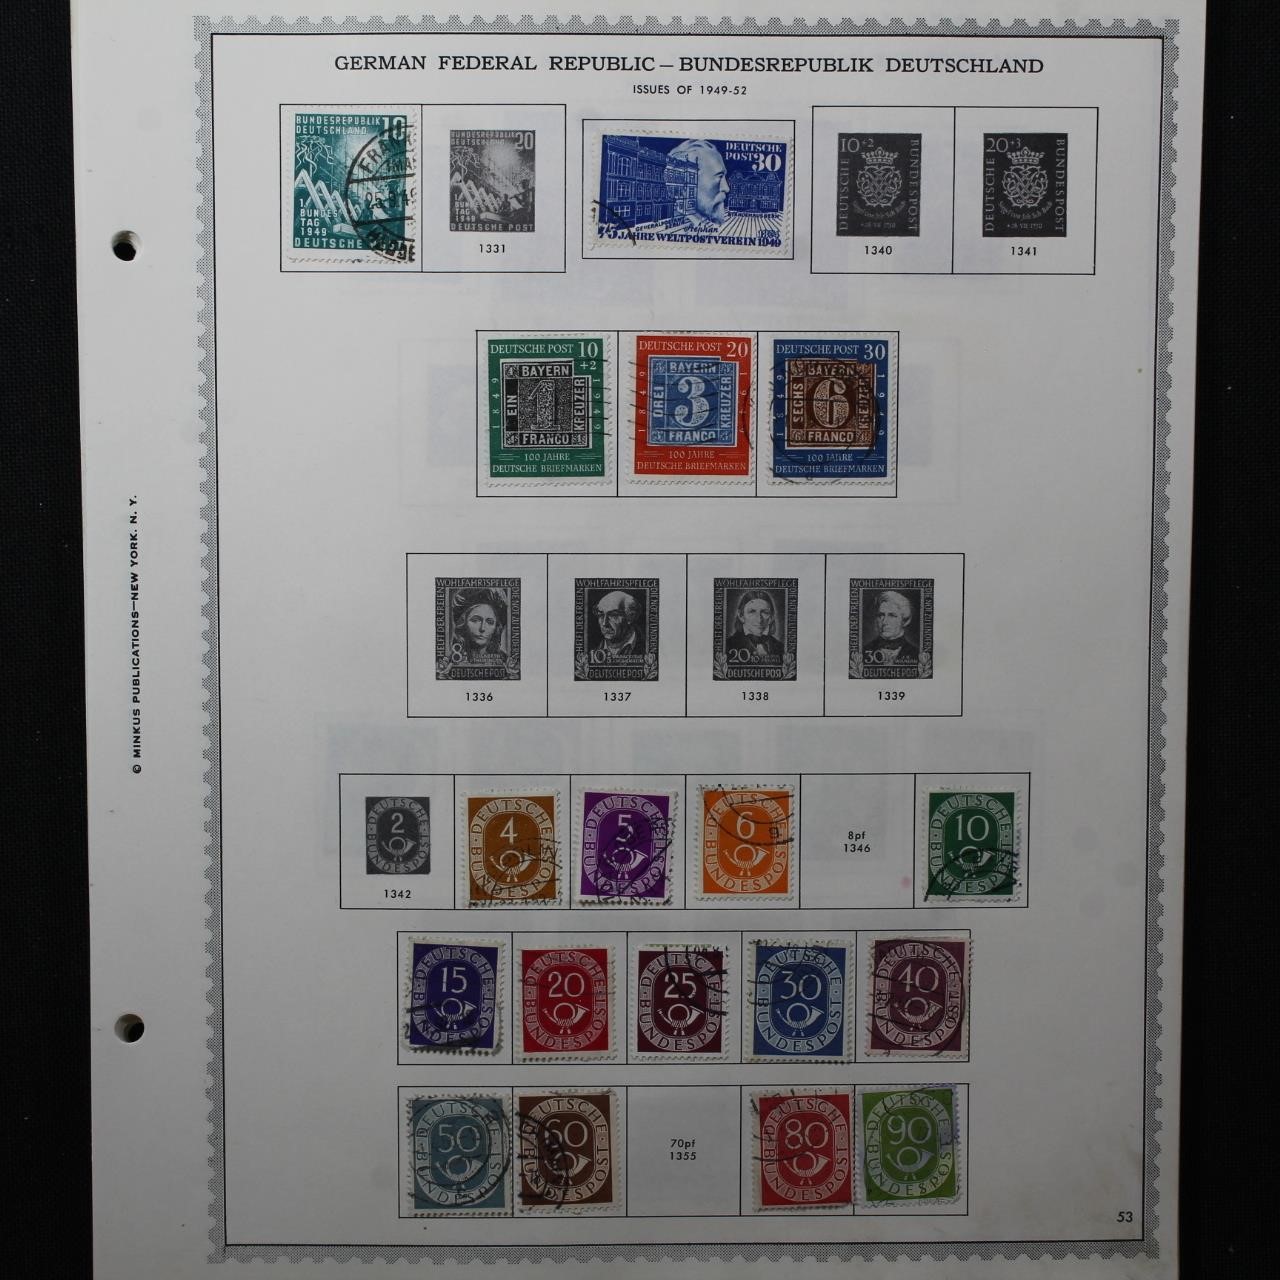 October 11th, 2020 Weekly Stamps & Collectibles Auction